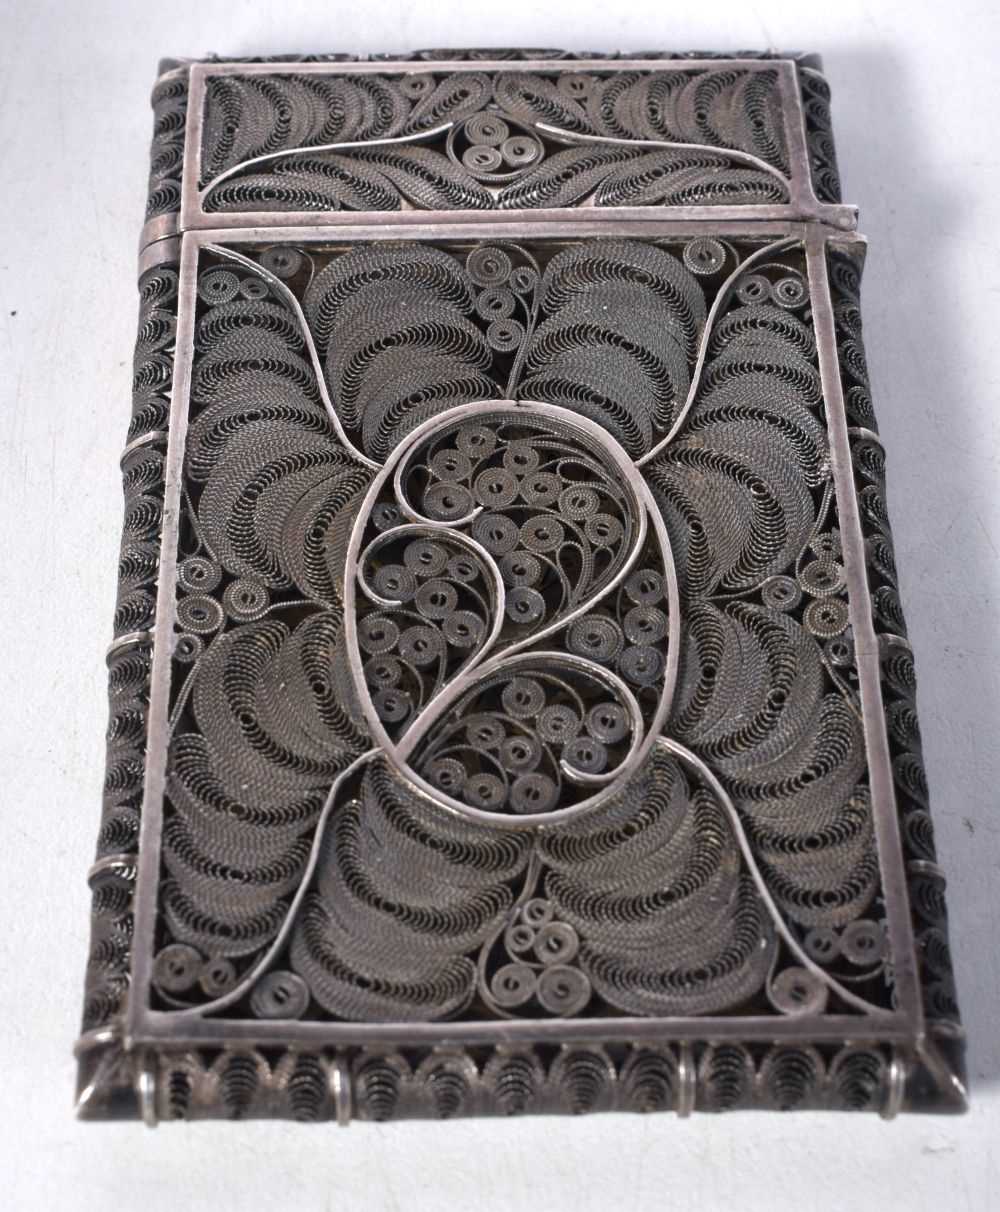 A Filigree Silver Card Case. 9.8 cm x 6.1cm x 1cm, weight 56.8g - Image 5 of 7